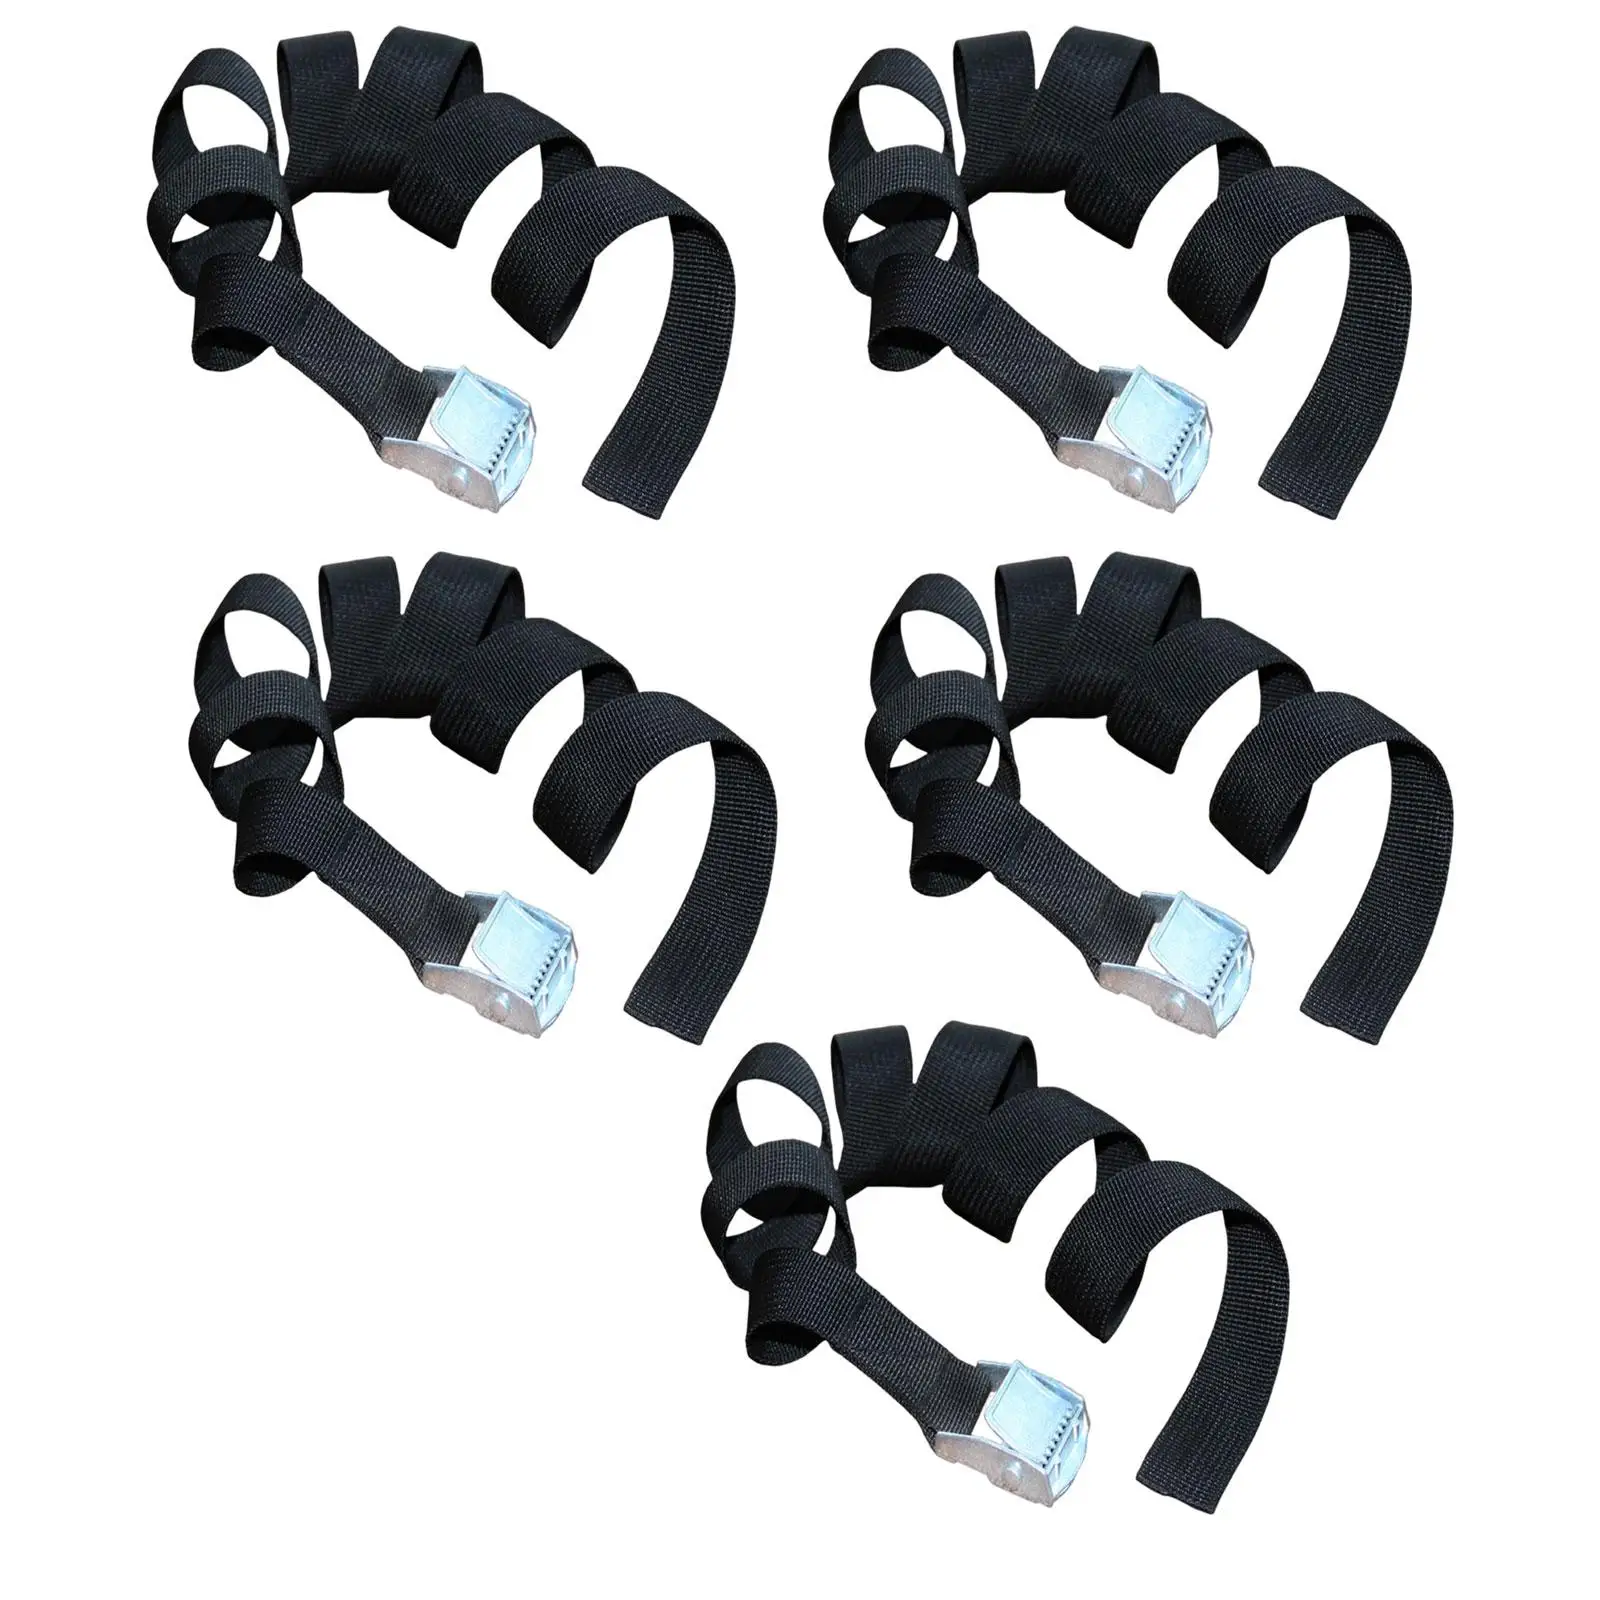 5Pcs Tie Down Straps Zinc Alloy Press Buckle Luggage Strap for Fixing